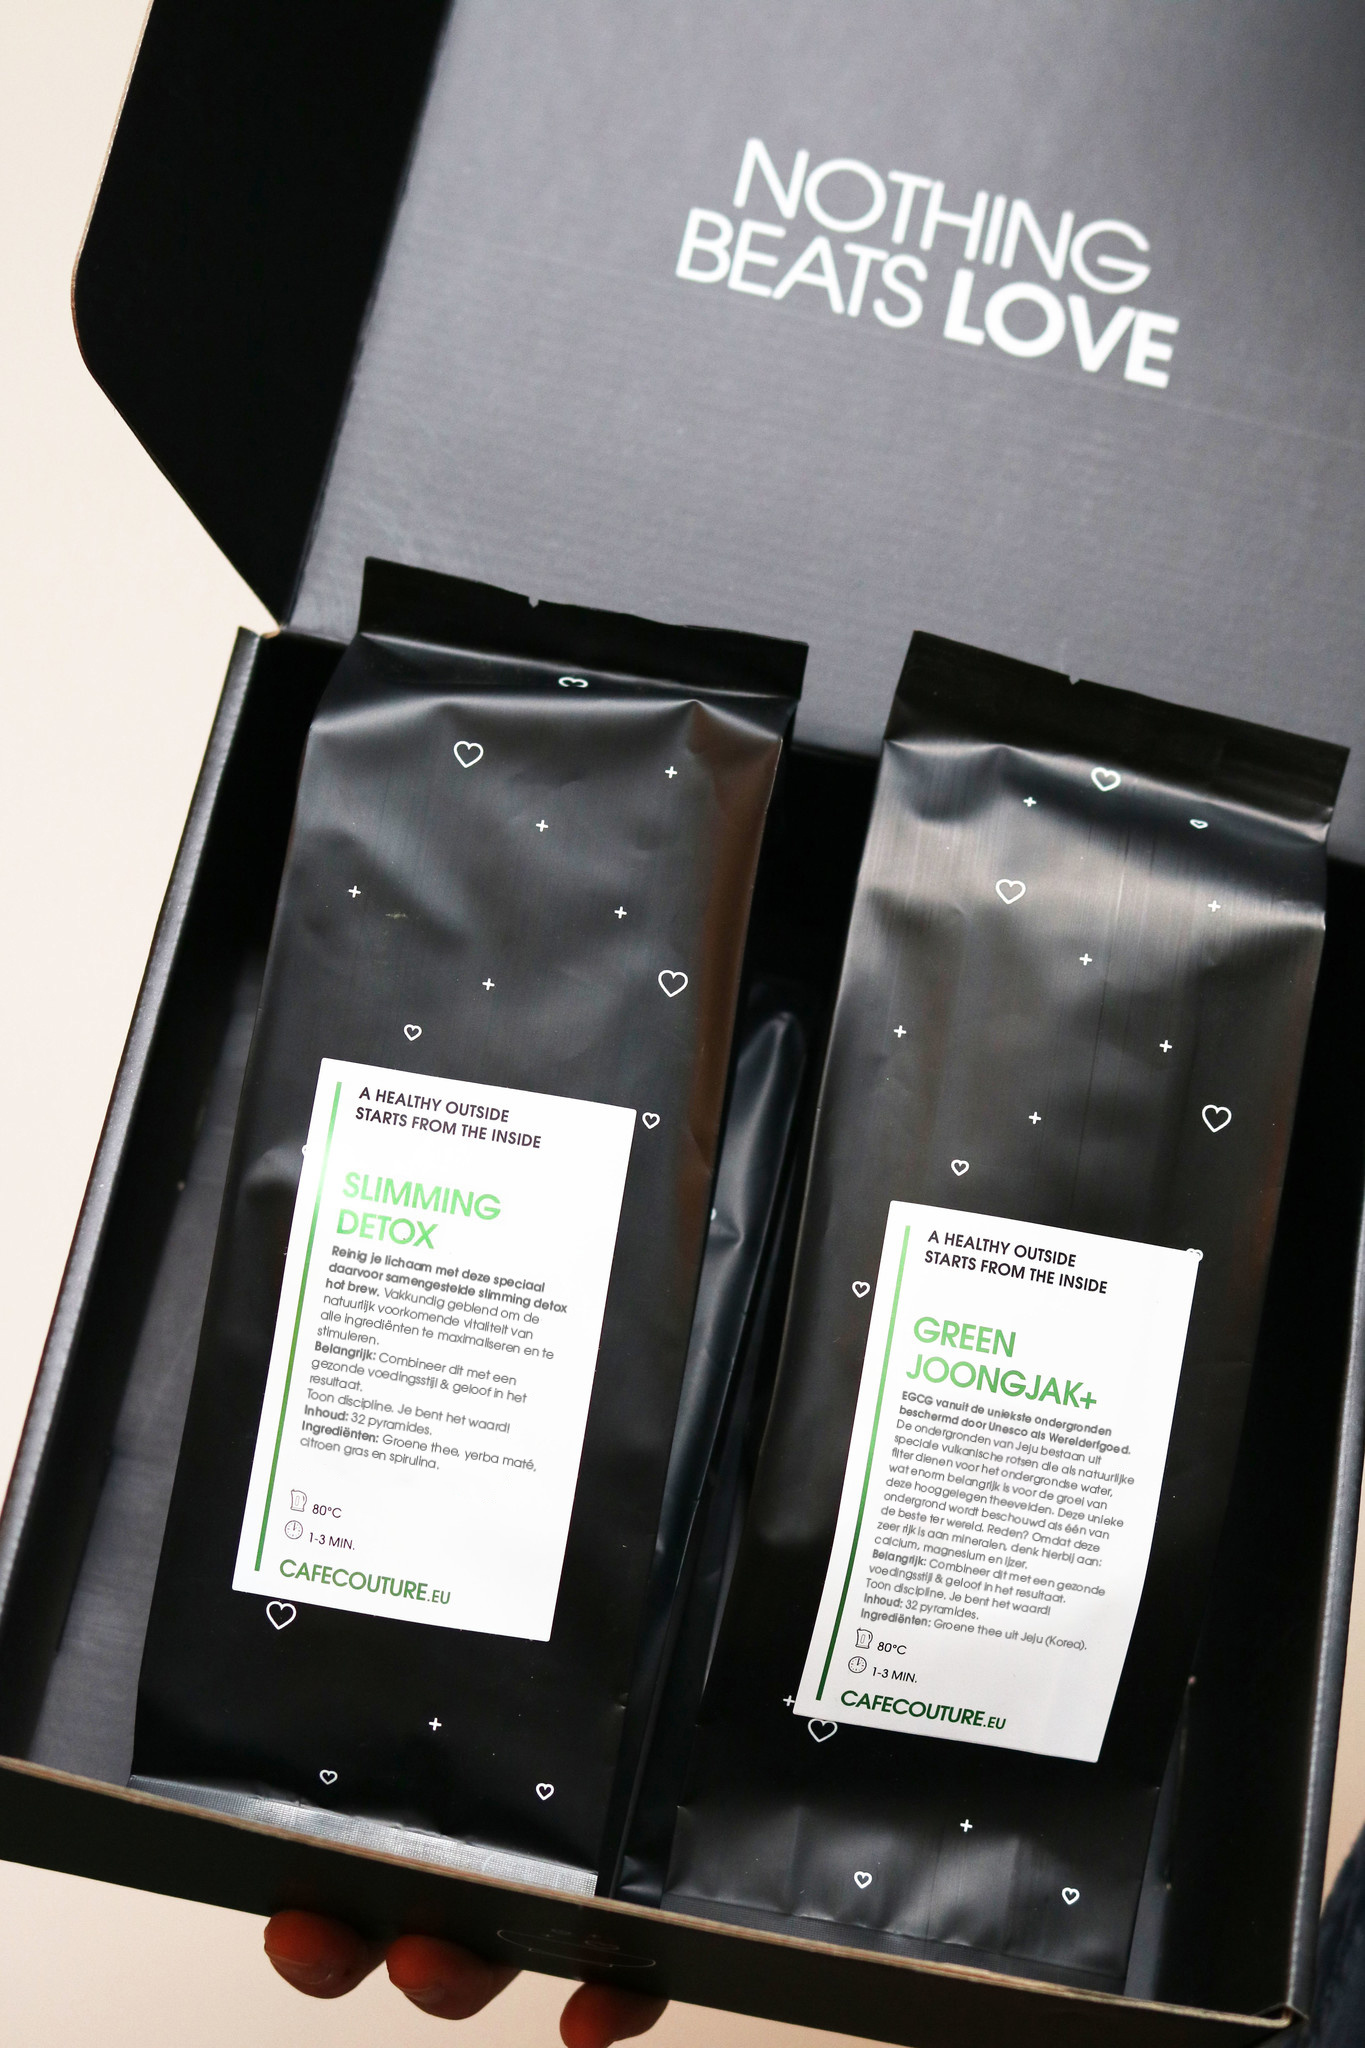 Hot Brew 1X Slimming Detox and 1X Green Joongjak in WAY OF LIFE box